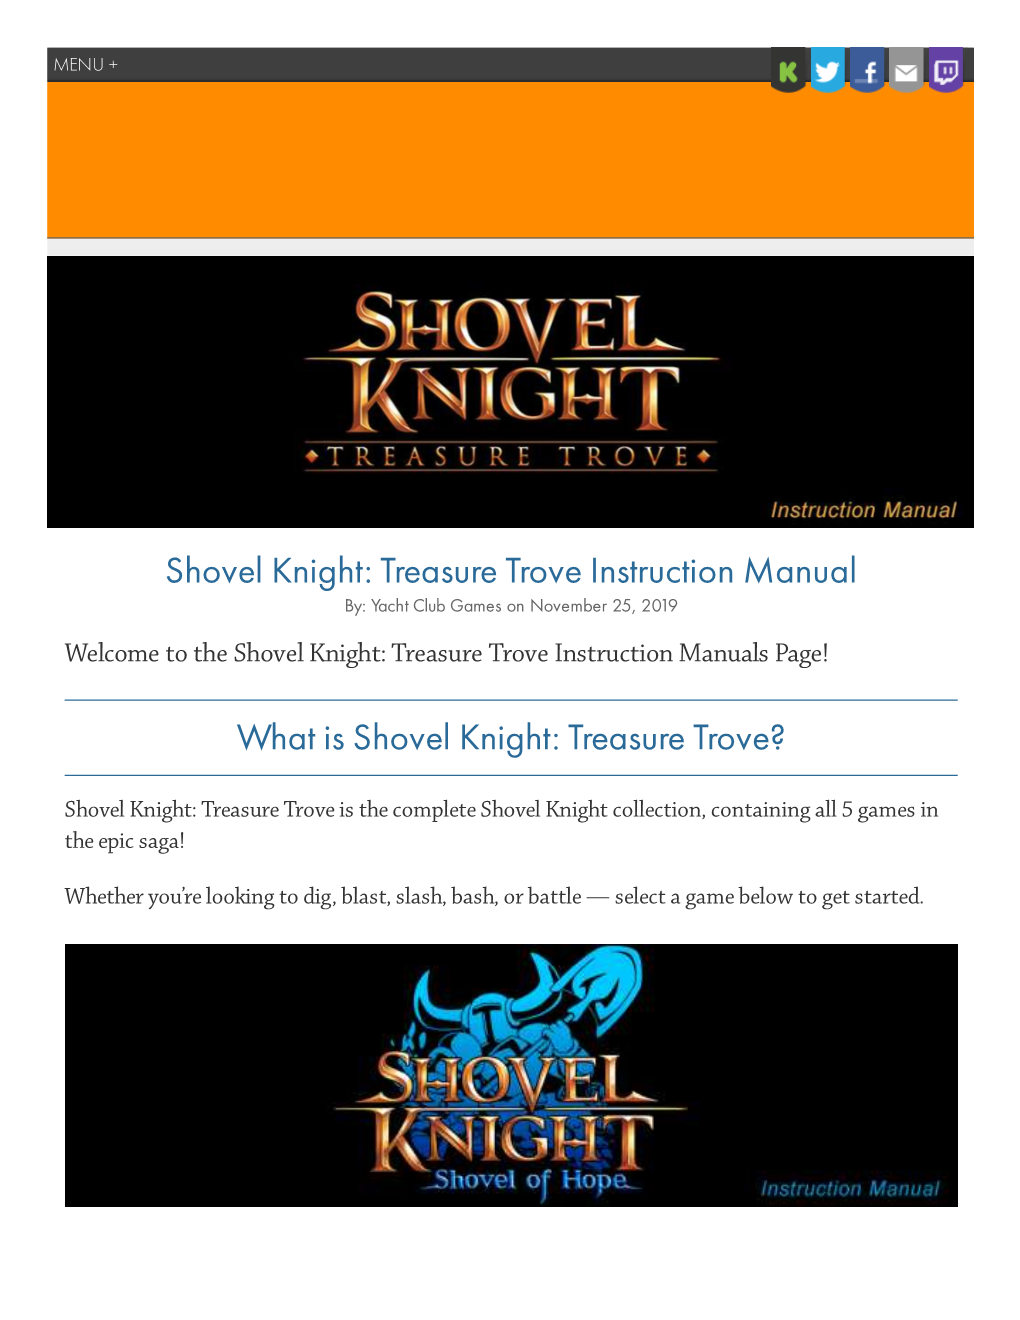 Shovel Knight: Treasure Trove Instruction Manual By: Yacht Club Games on November 25, 2019 Welcome to the Shovel Knight: Treasure Trove Instruction Manuals Page!